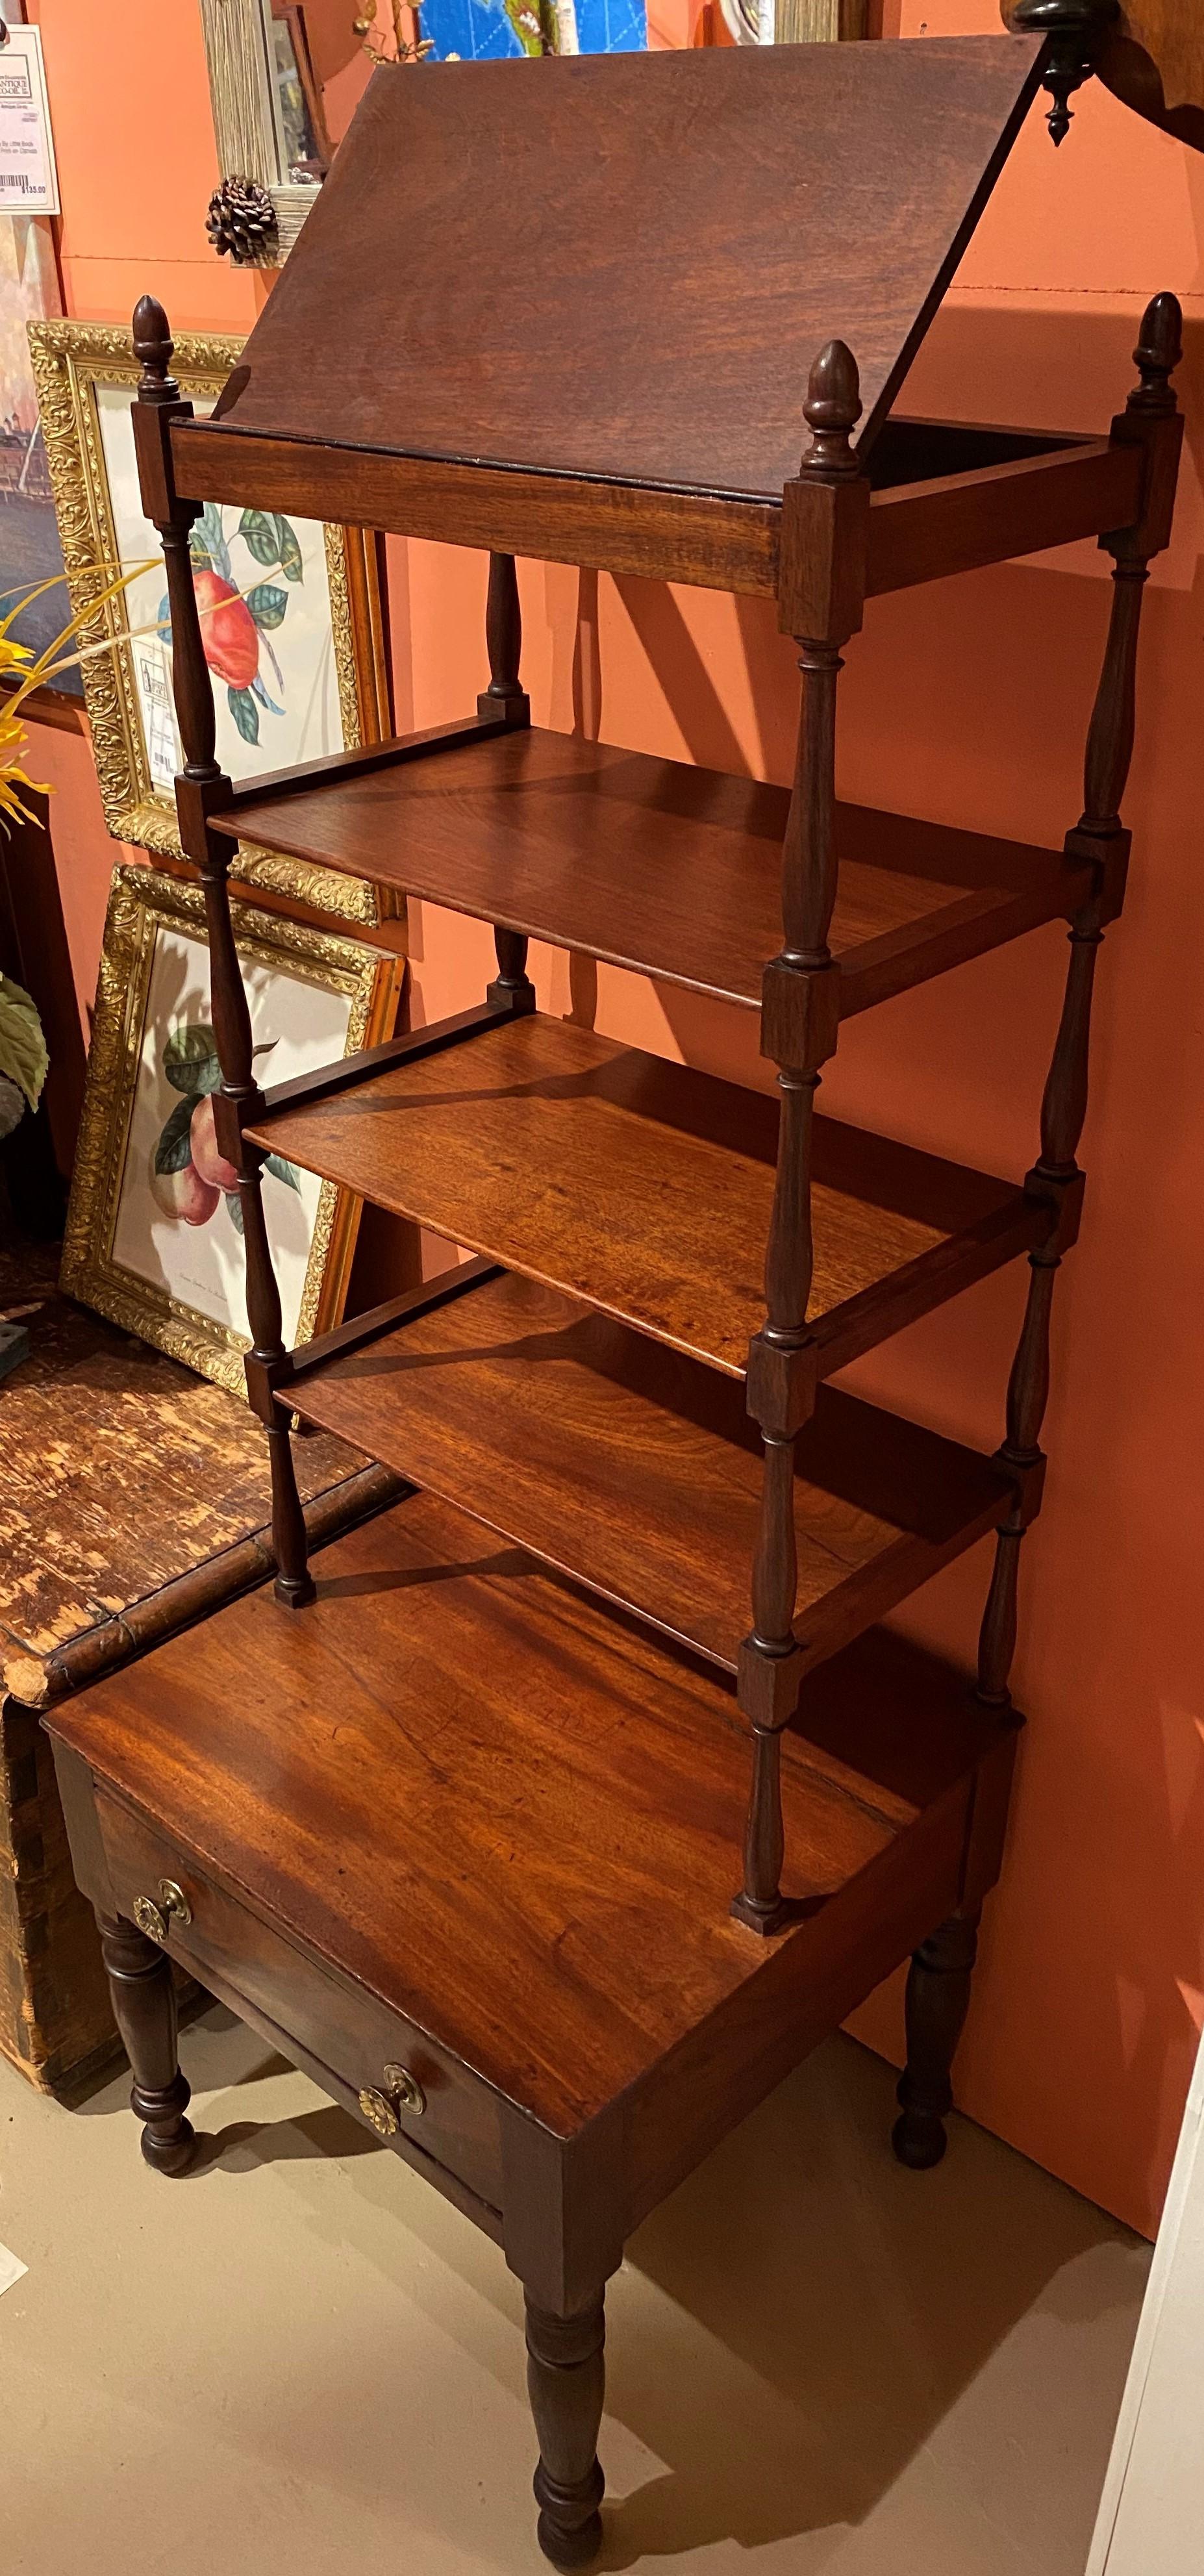 A rare form mahogany one drawer four shelf étagère with hinged top shelf for displaying books, prints or photographs, reverse acorn finials, nicely turned shelf supports, punched brass pulls, and turned legs. Probably New York in origin, dating to